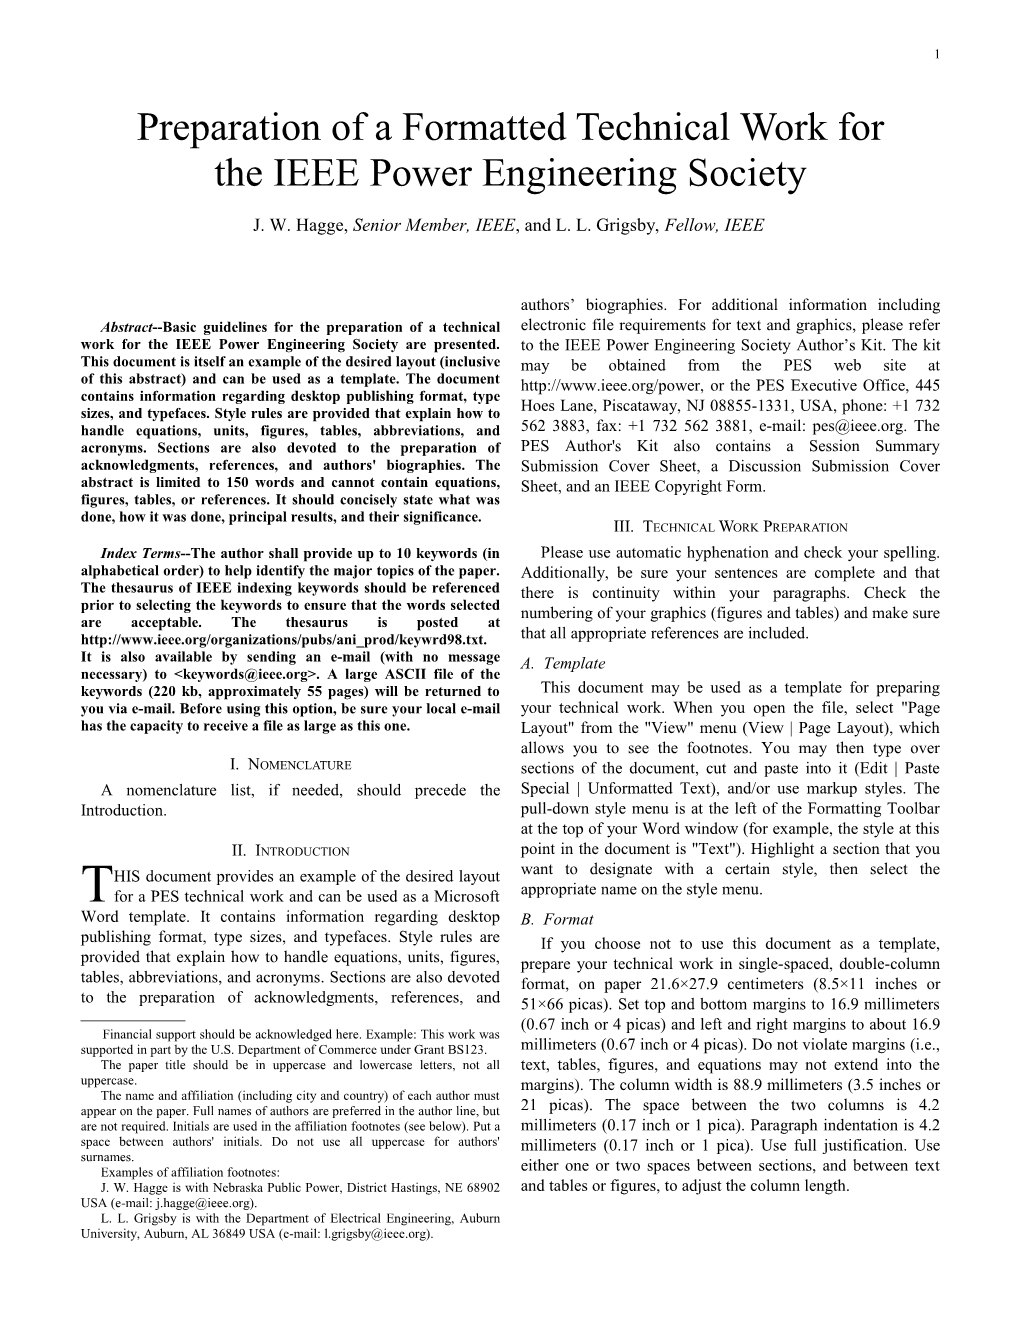 Preparation of a Formatted Technical Work for the IEEE Power Engineering Society